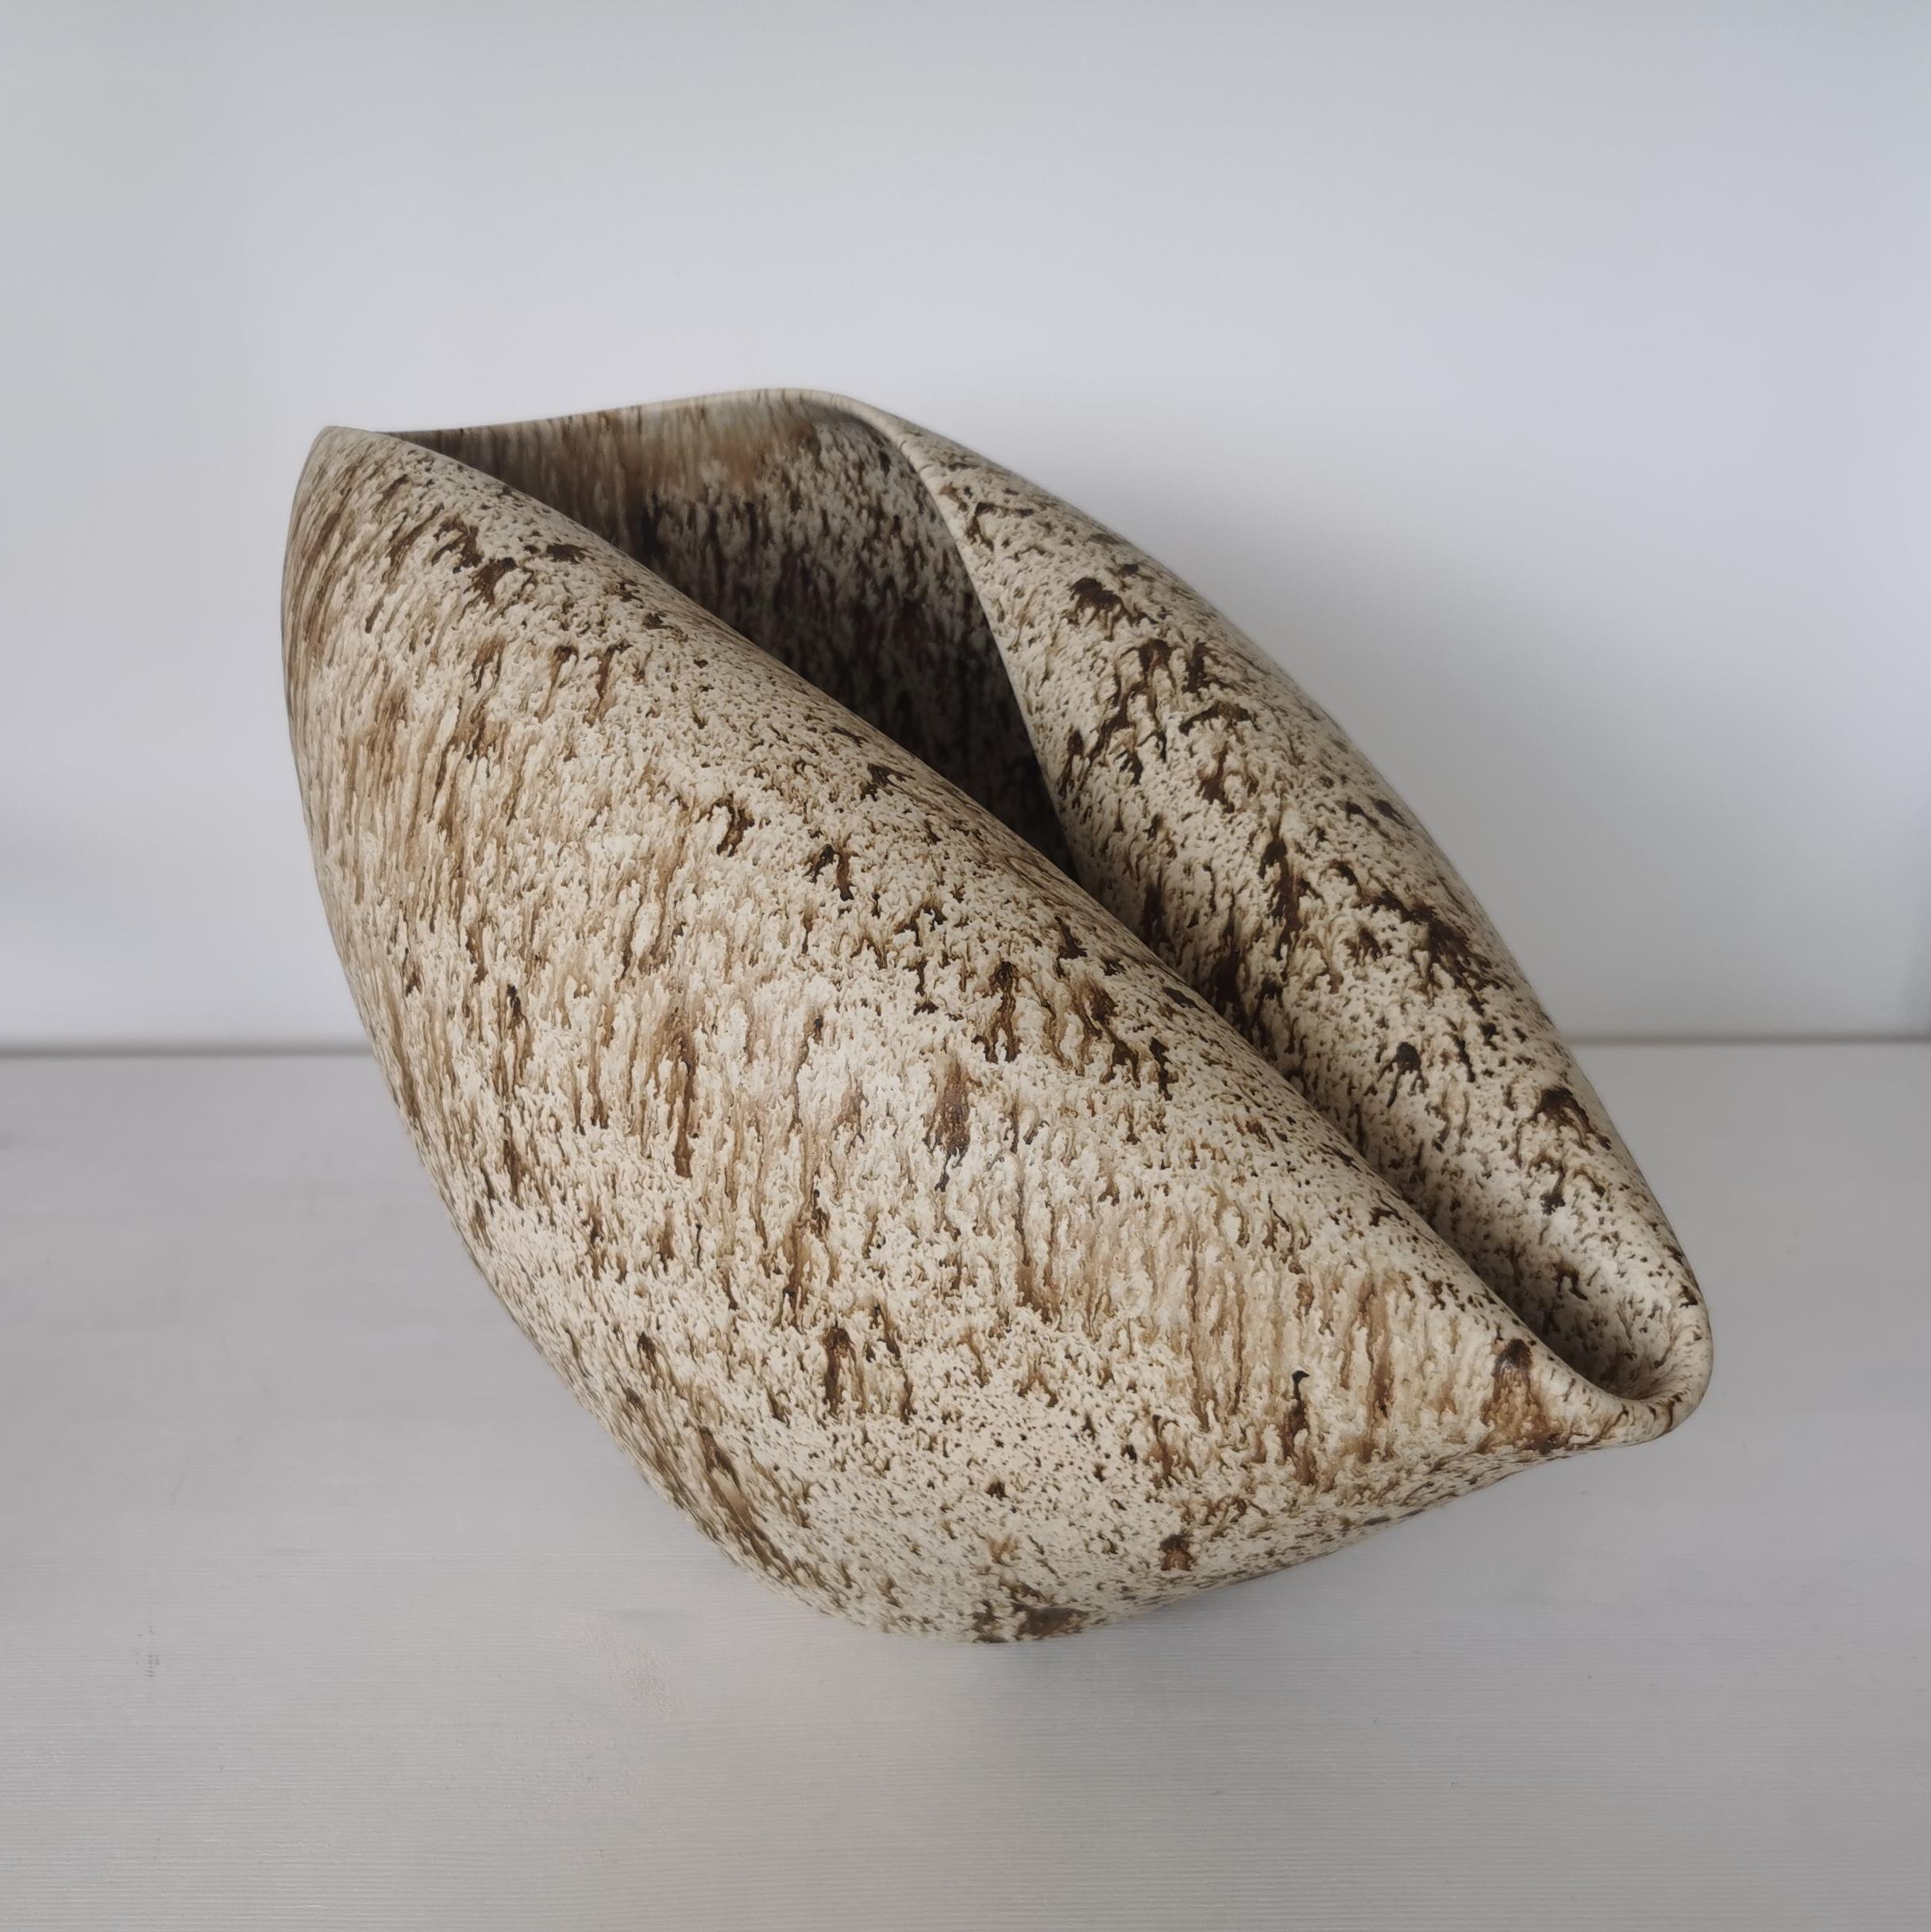 Oval Form with White and Brown Speckled Glaze, Vessel No.99, Ceramic Sculpture For Sale 1